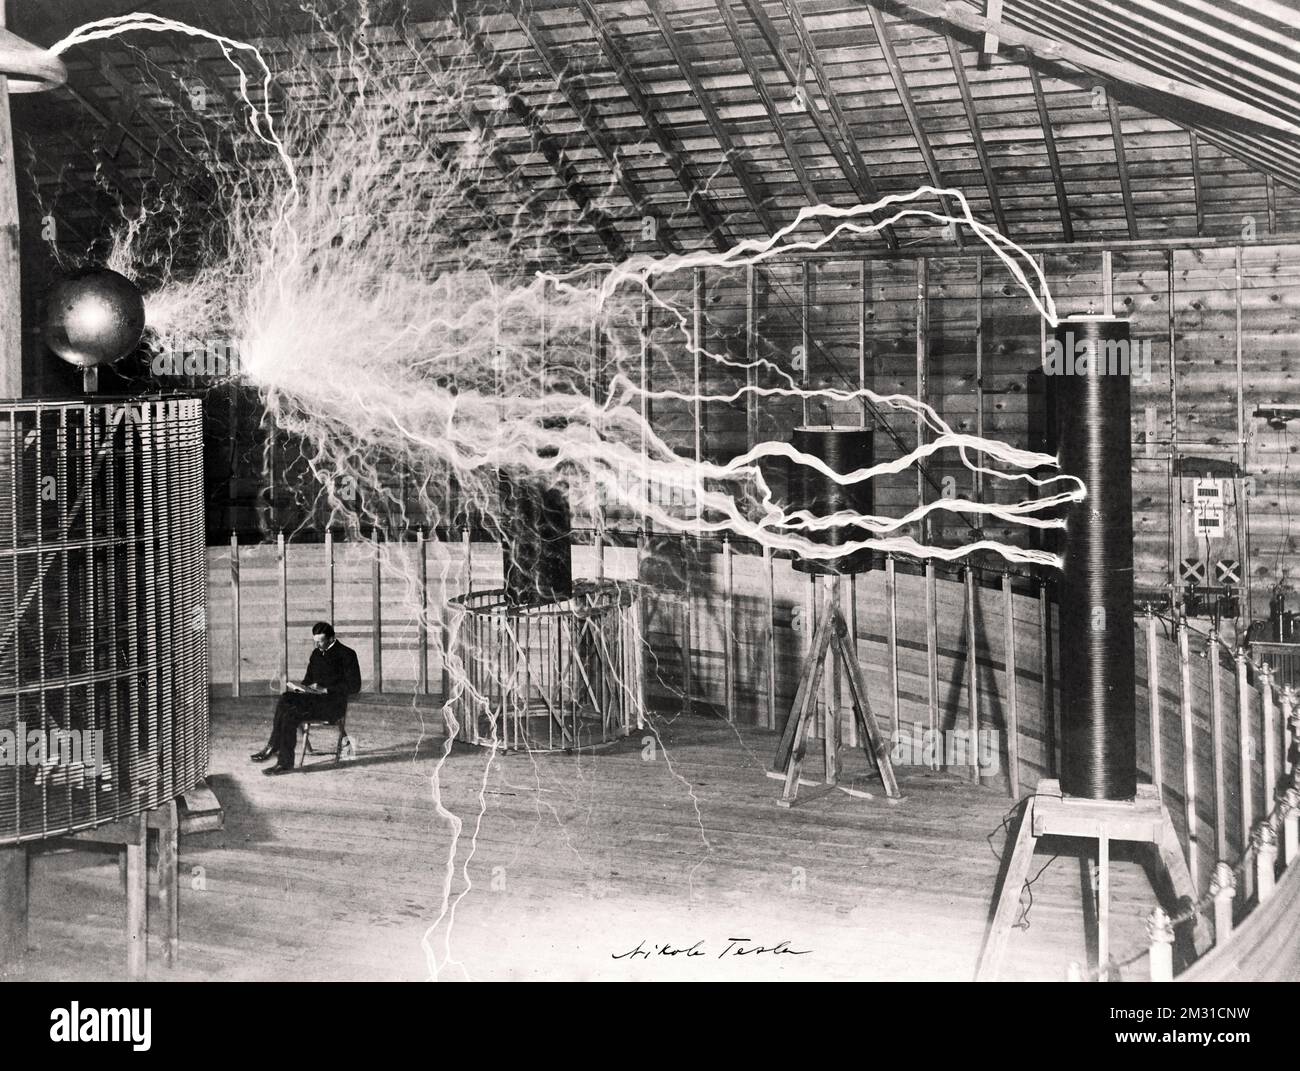 Nikola Tesla, with his equipment for producing high-frequency alternating currents produces artificial 'lightning' in his laboratory at Colorado Springs. Date: 1899-1900. Nikola Tesla was a Serbian-American inventor, electrical engineer, mechanical engineer, and futurist best known for his contributions to the design of the modern alternating current electricity supply system.  An optimised version of an original photographic print. Stock Photo